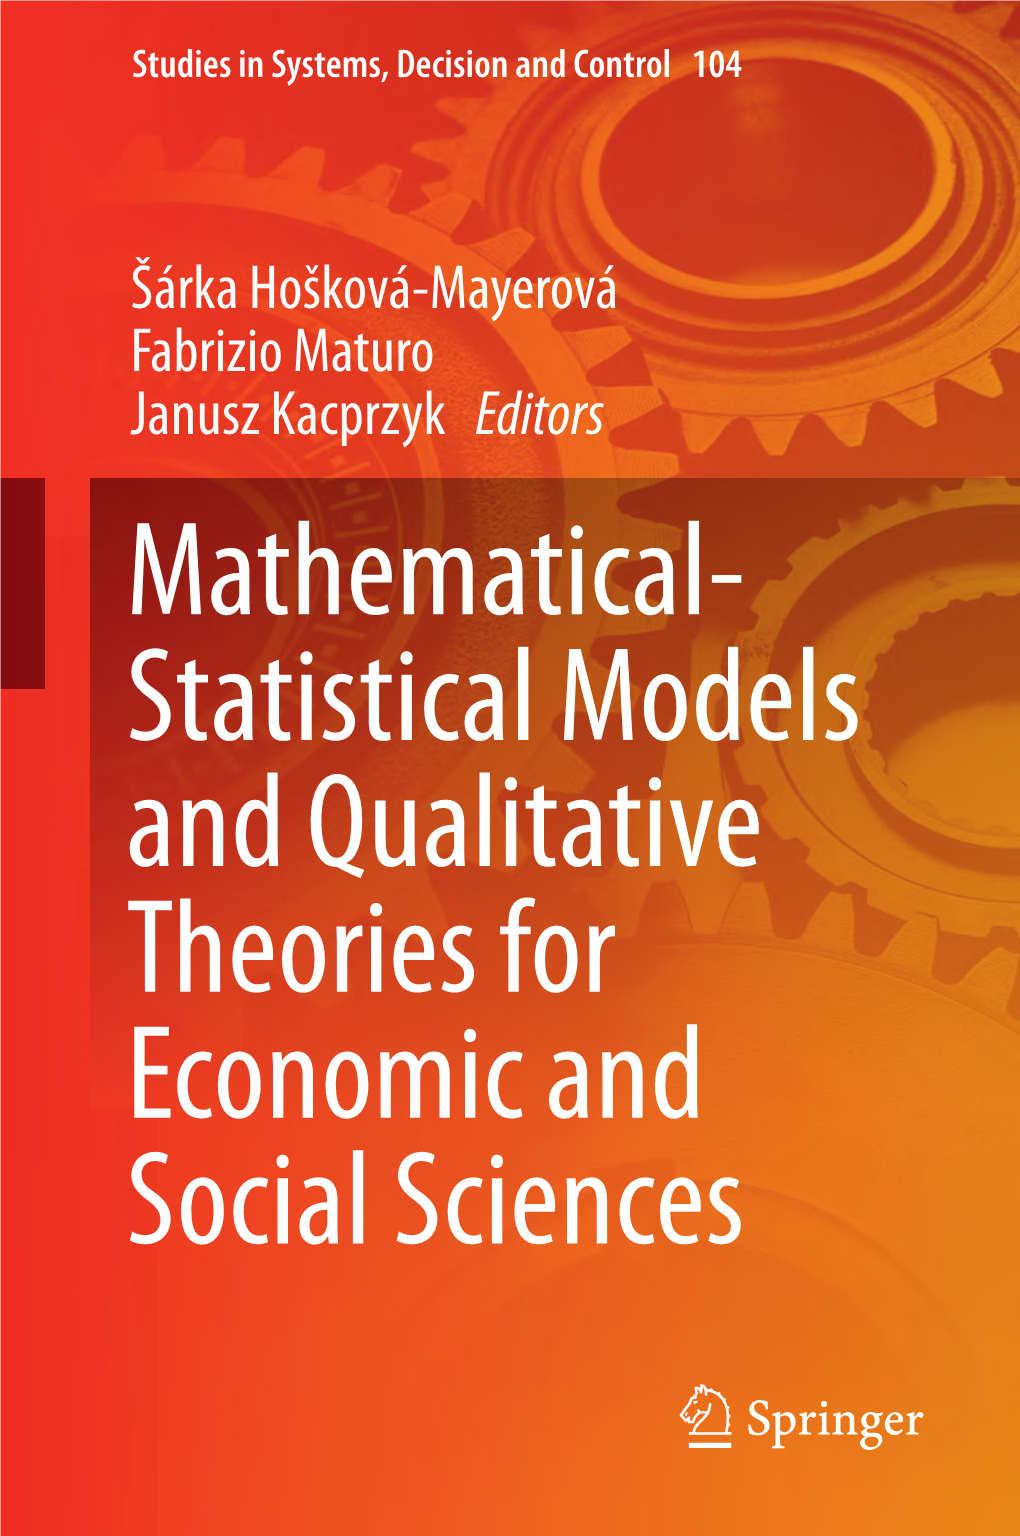 Mathematical- Statistical Models and Qualitative Theories for Economic and Social Sciences Studies in Systems, Decision and Control